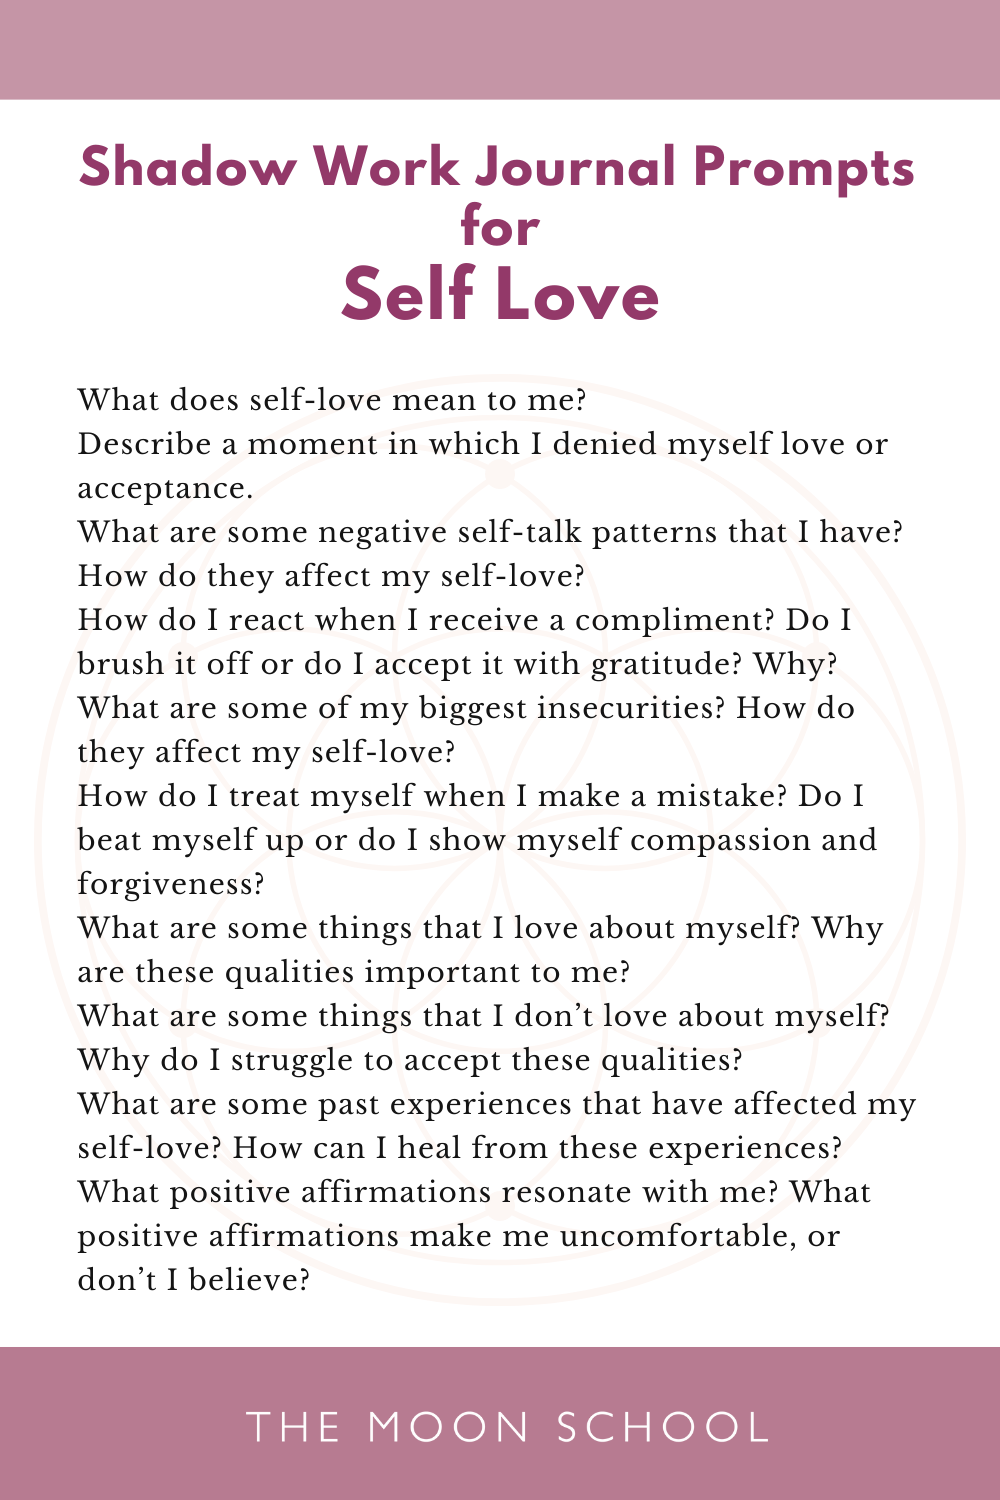 List 0f 10 Shadow Work Journal Prompts for Self Love